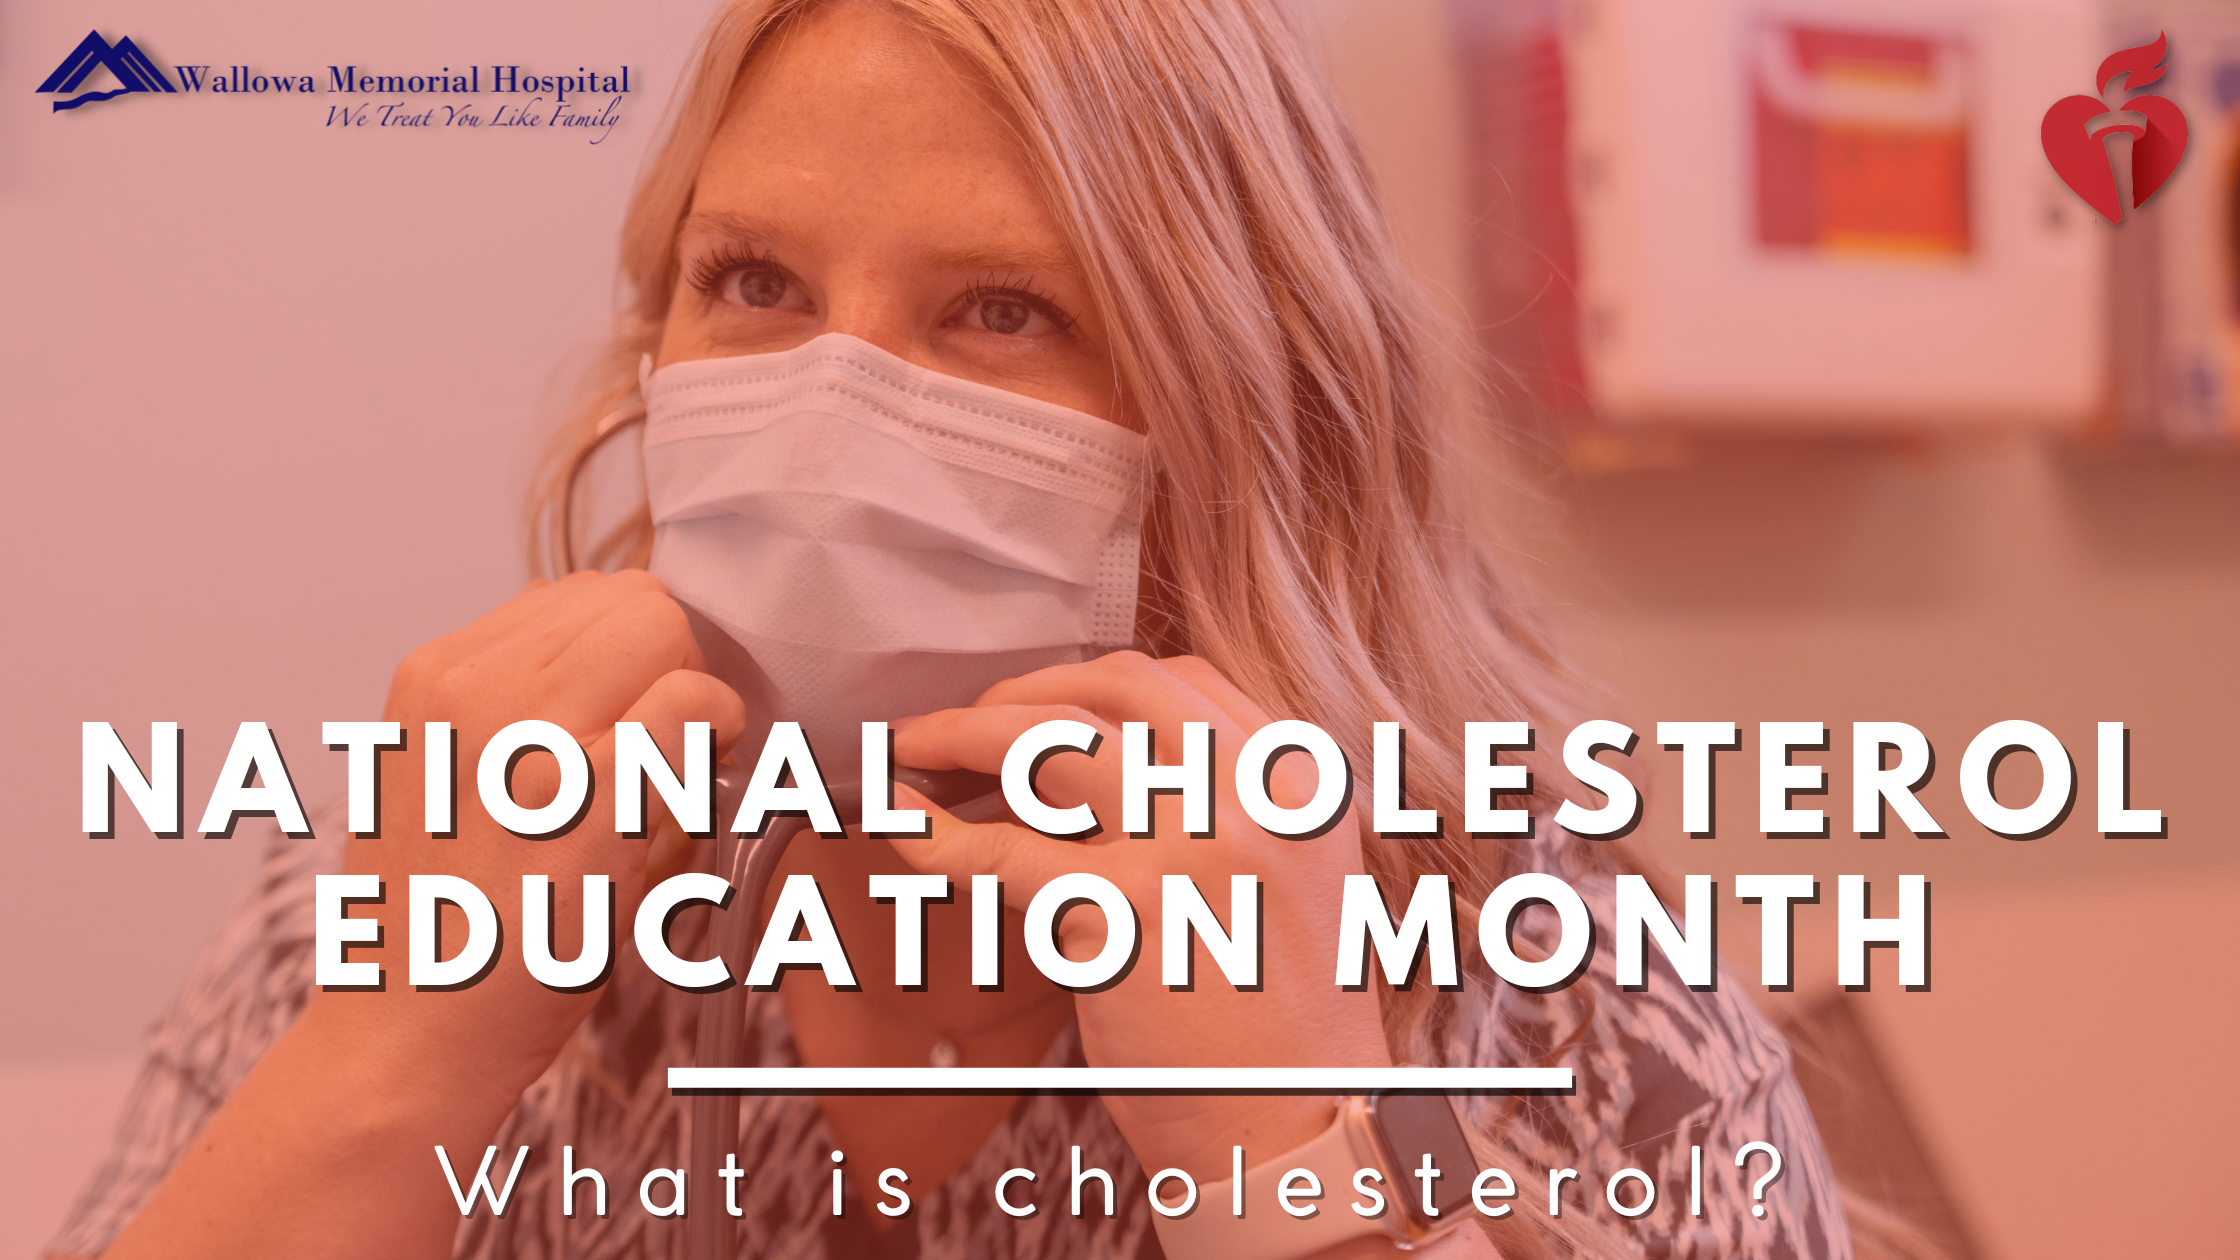 Medical Assistant putting a stethoscope into her ear with title "National Cholesterol Education Month, What is cholesterol?" overlaid